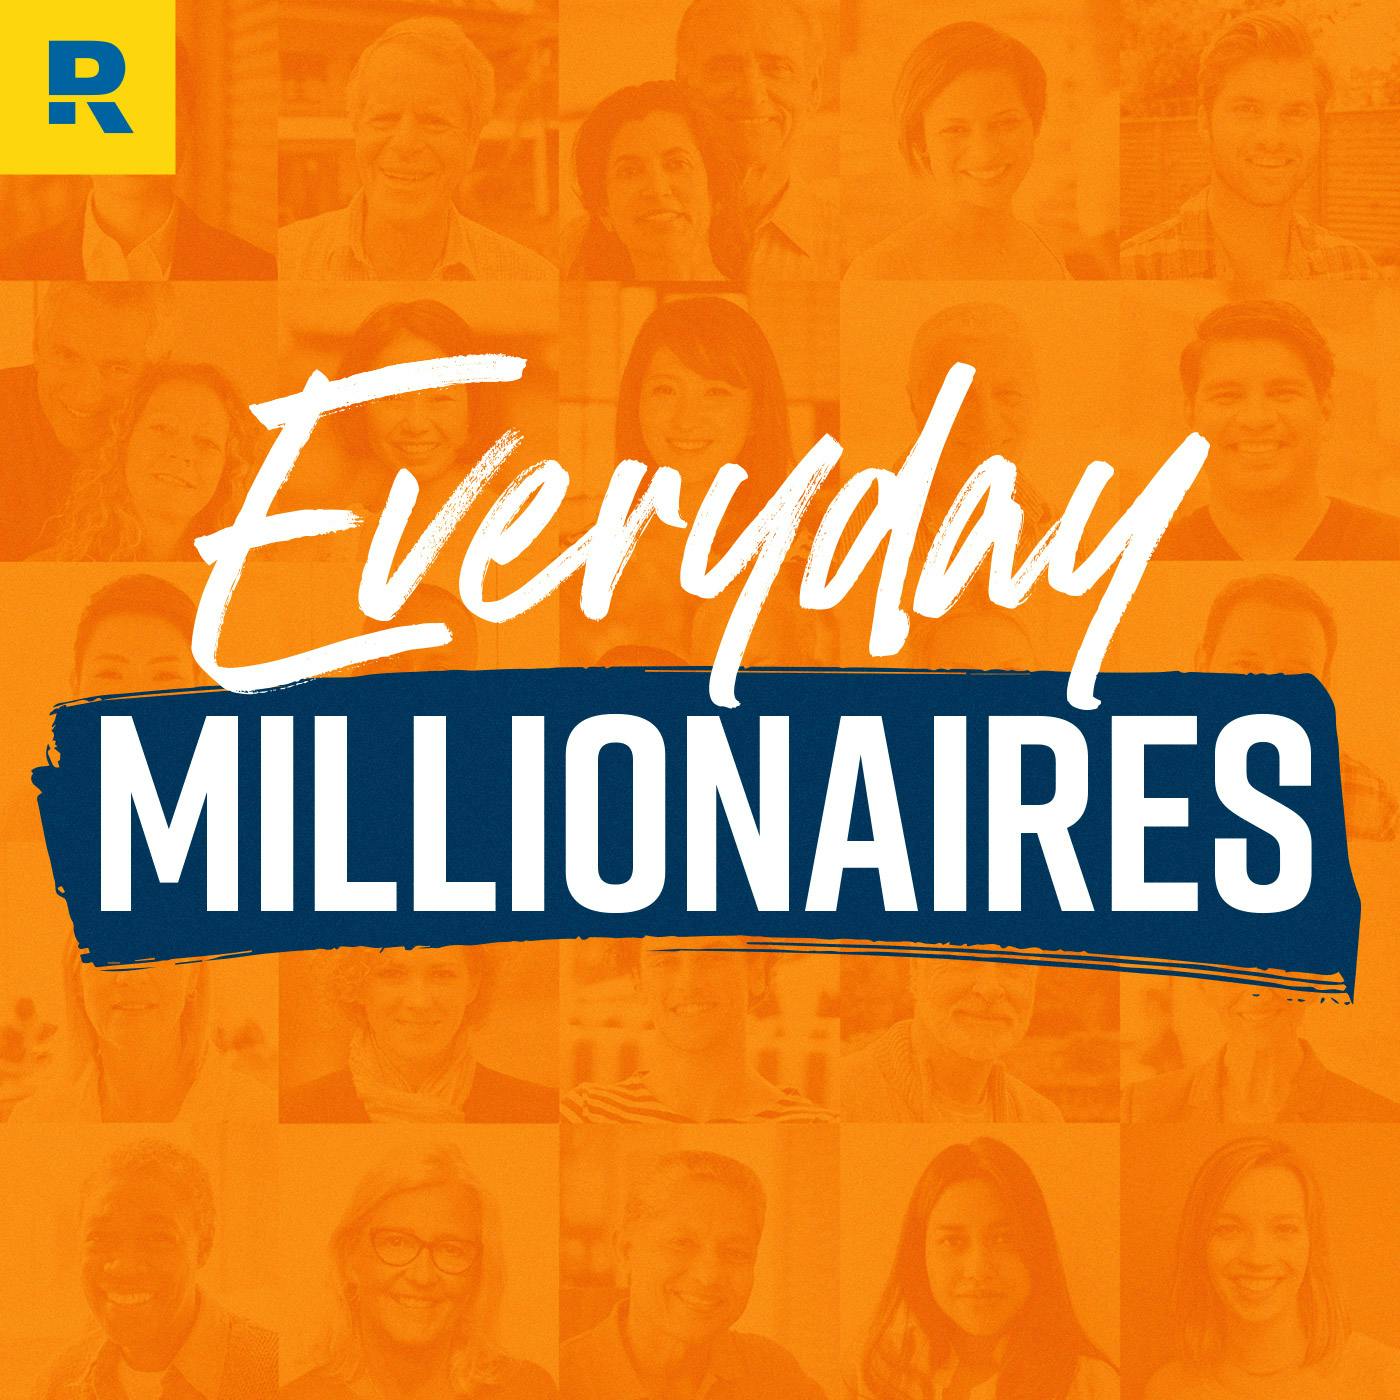 You Are Statistically a Moron if You Think THIS About Millionaires - Dave Ramsey Rant